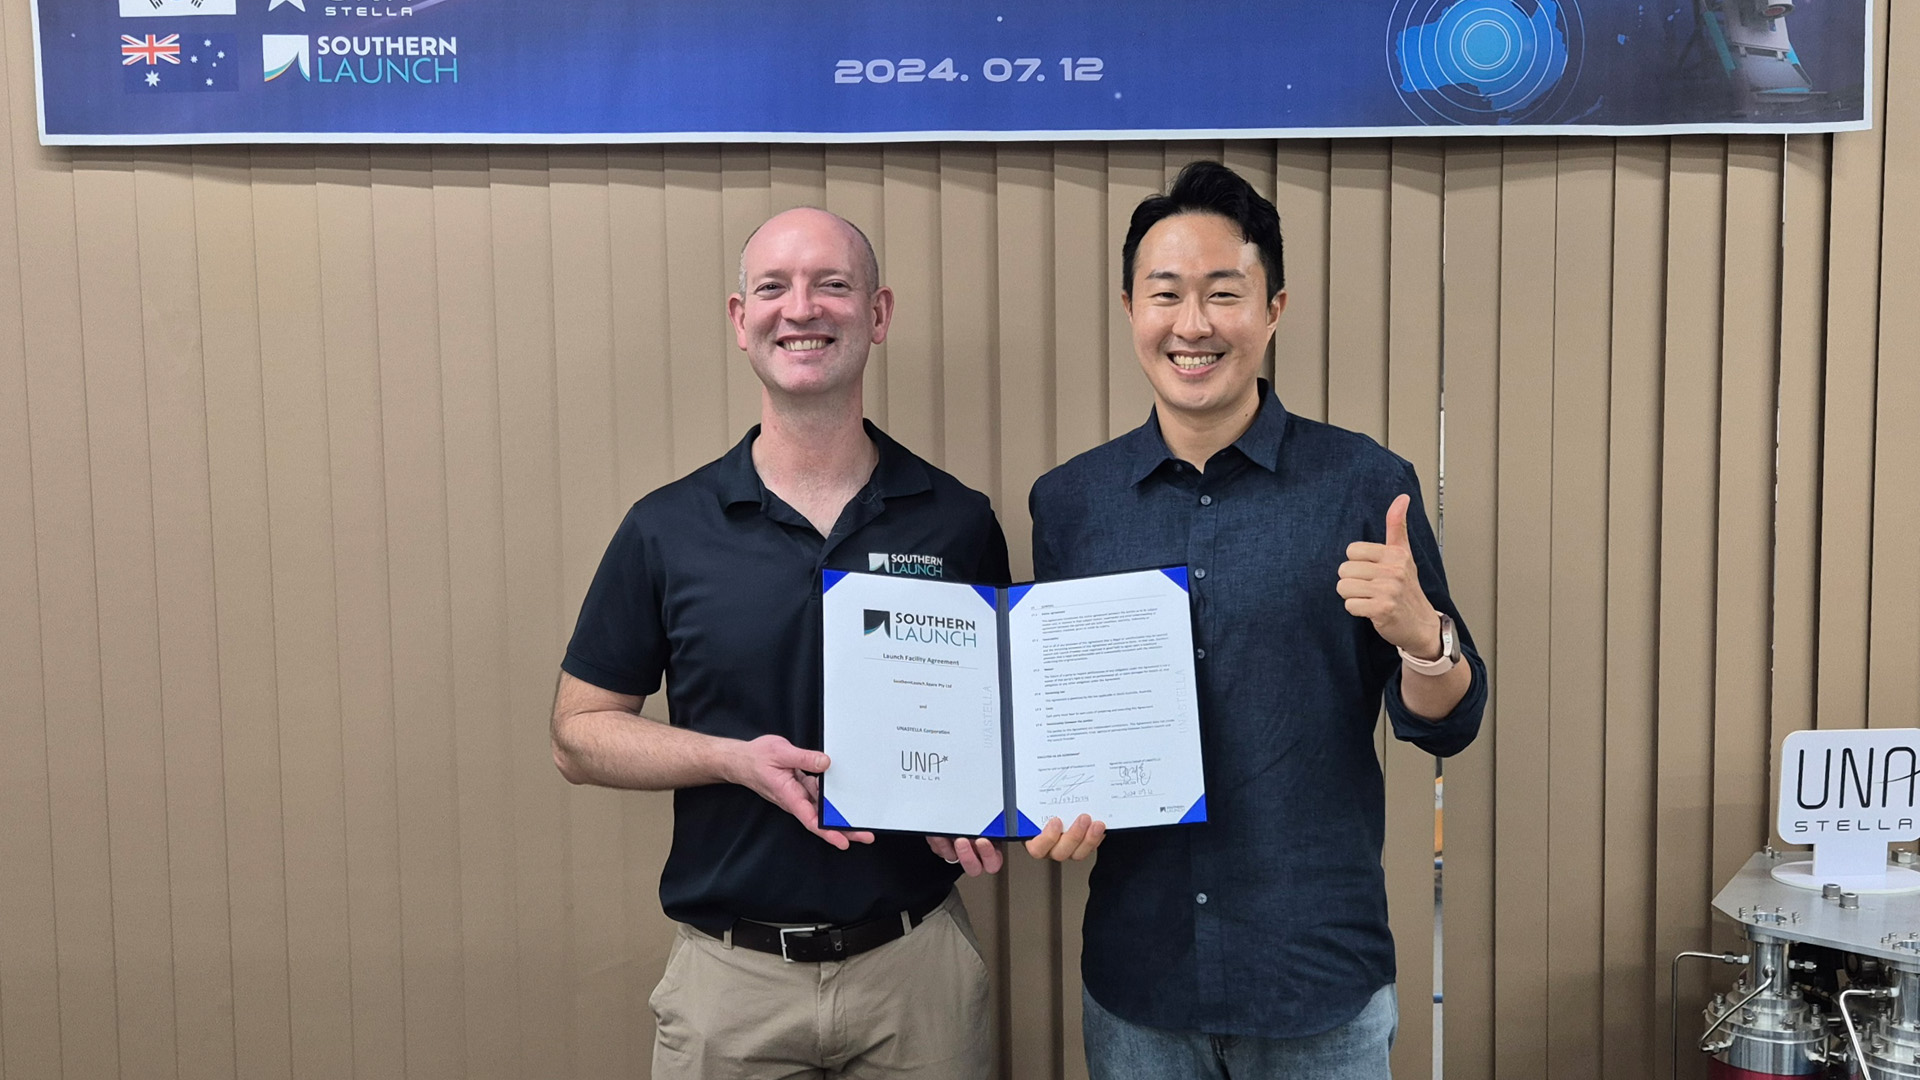 Two men at a launch facility holding a signed agreement